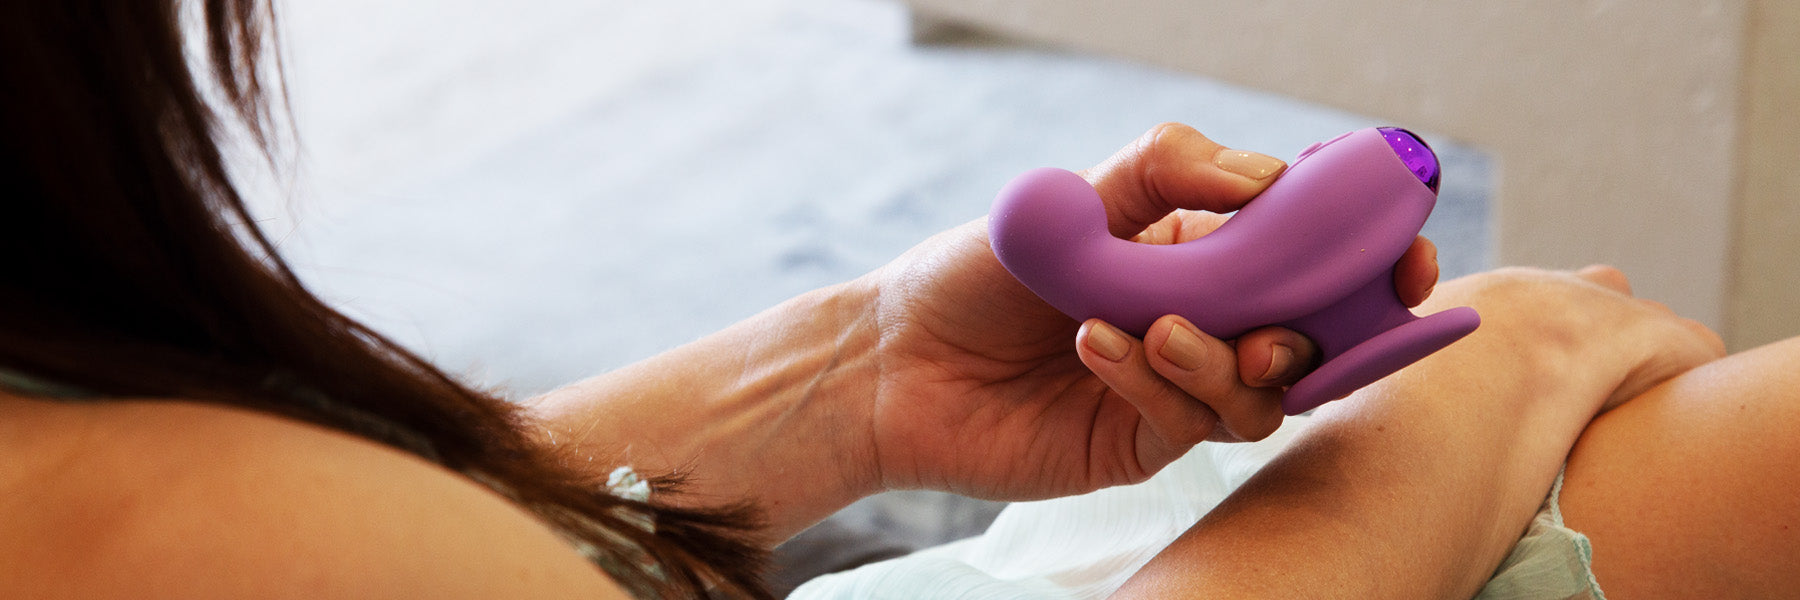 The Benefits of Using a Vibrator in Menopause pic